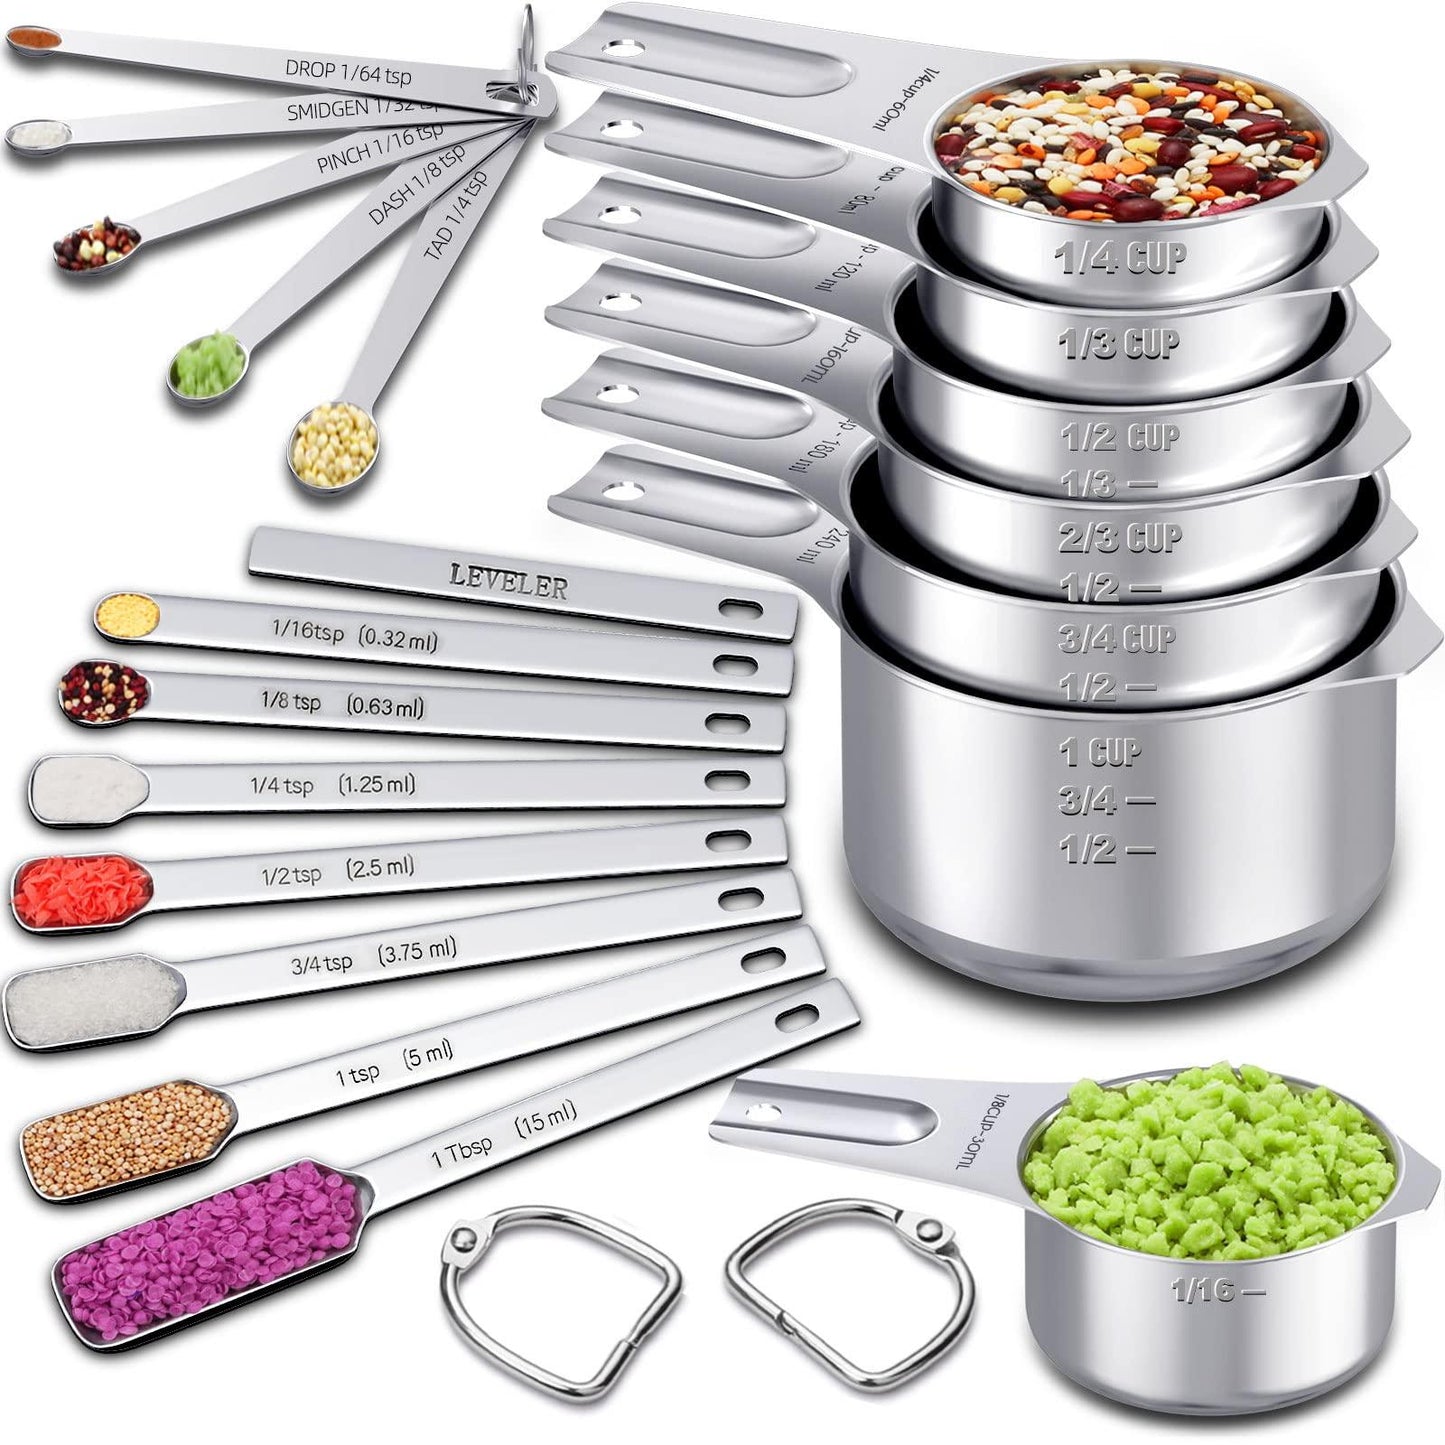 Measuring Cups and Spoons Set of 20, 7 Stainless Steel Nesting Measuring Cups & 7 Spoons, 1 + Leveler & 5 Mini Measuring Spoons for Cooking & Baking - CookCave